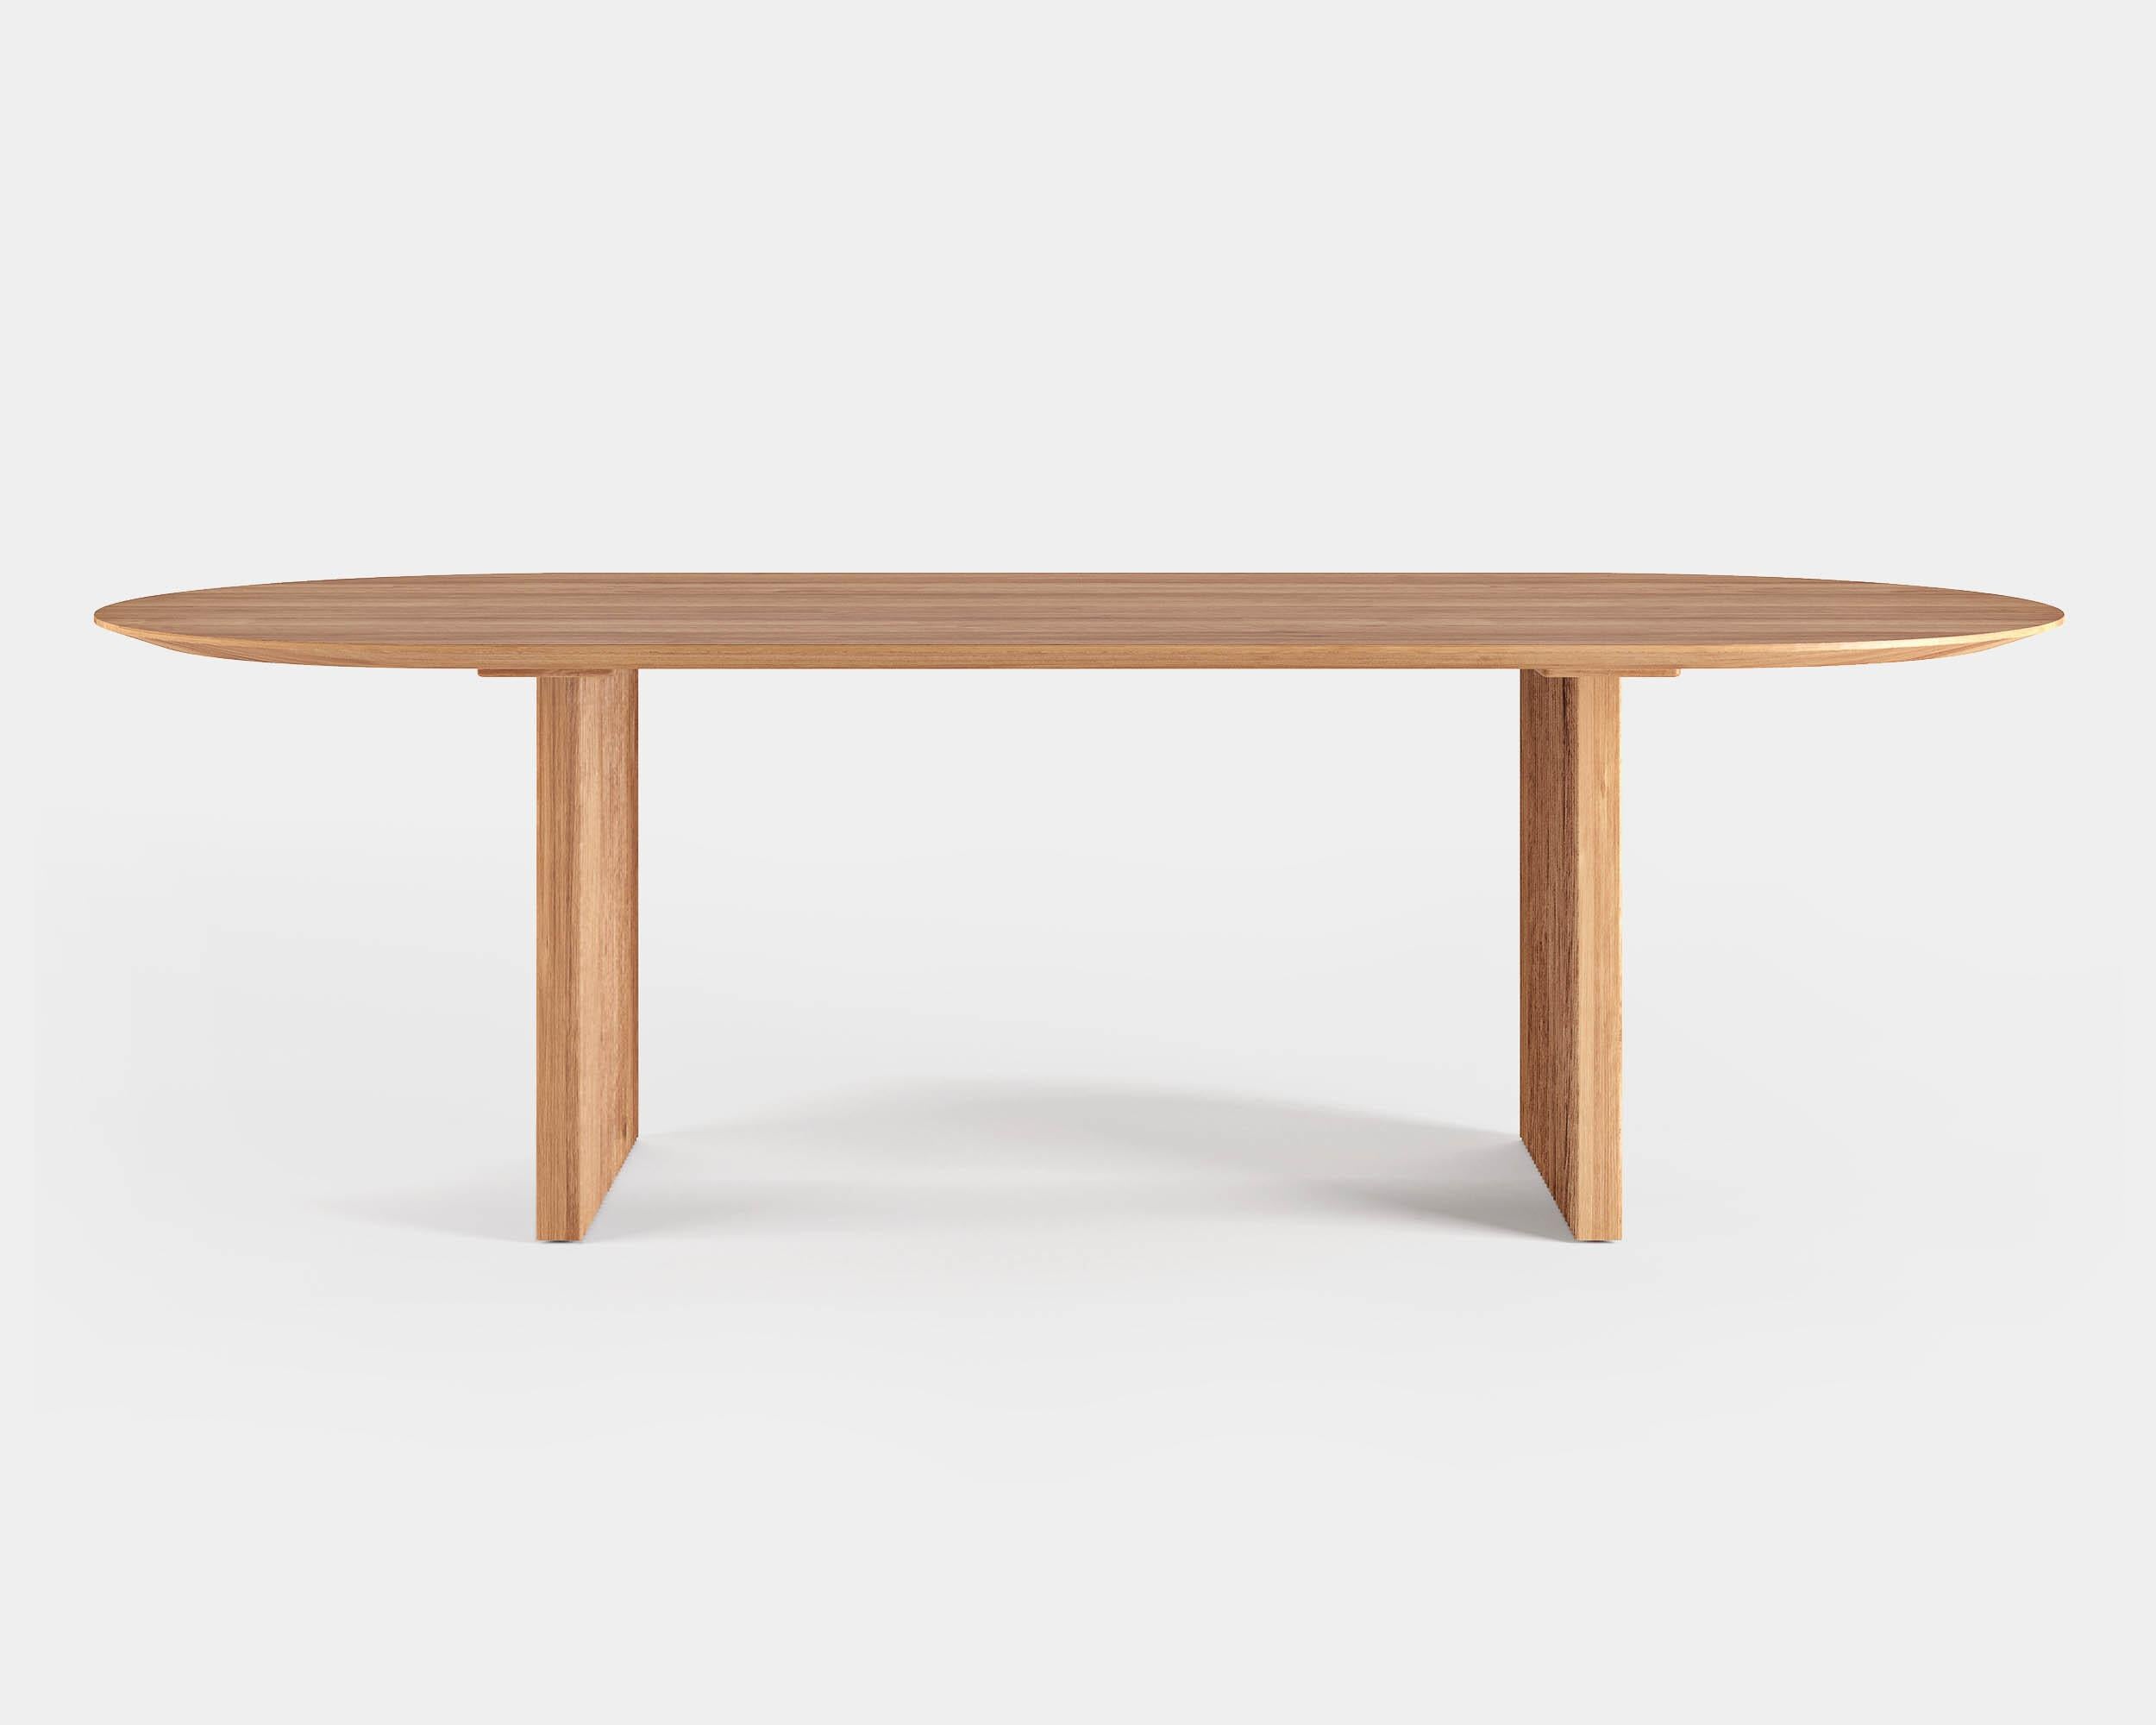 Ten dining table, oval, 400 cm.
Solid wood table top and legs. Handmade in Denmark. 

Measures: height: 72 or 74 cm.

Table top dimensions:
– 200 x 95 cm
– 240 x 105 cm
– 270 x 105 cm
– 300 x 105 cm
– 340 x 105 cm
– 370 x 105 cm
– 400 x